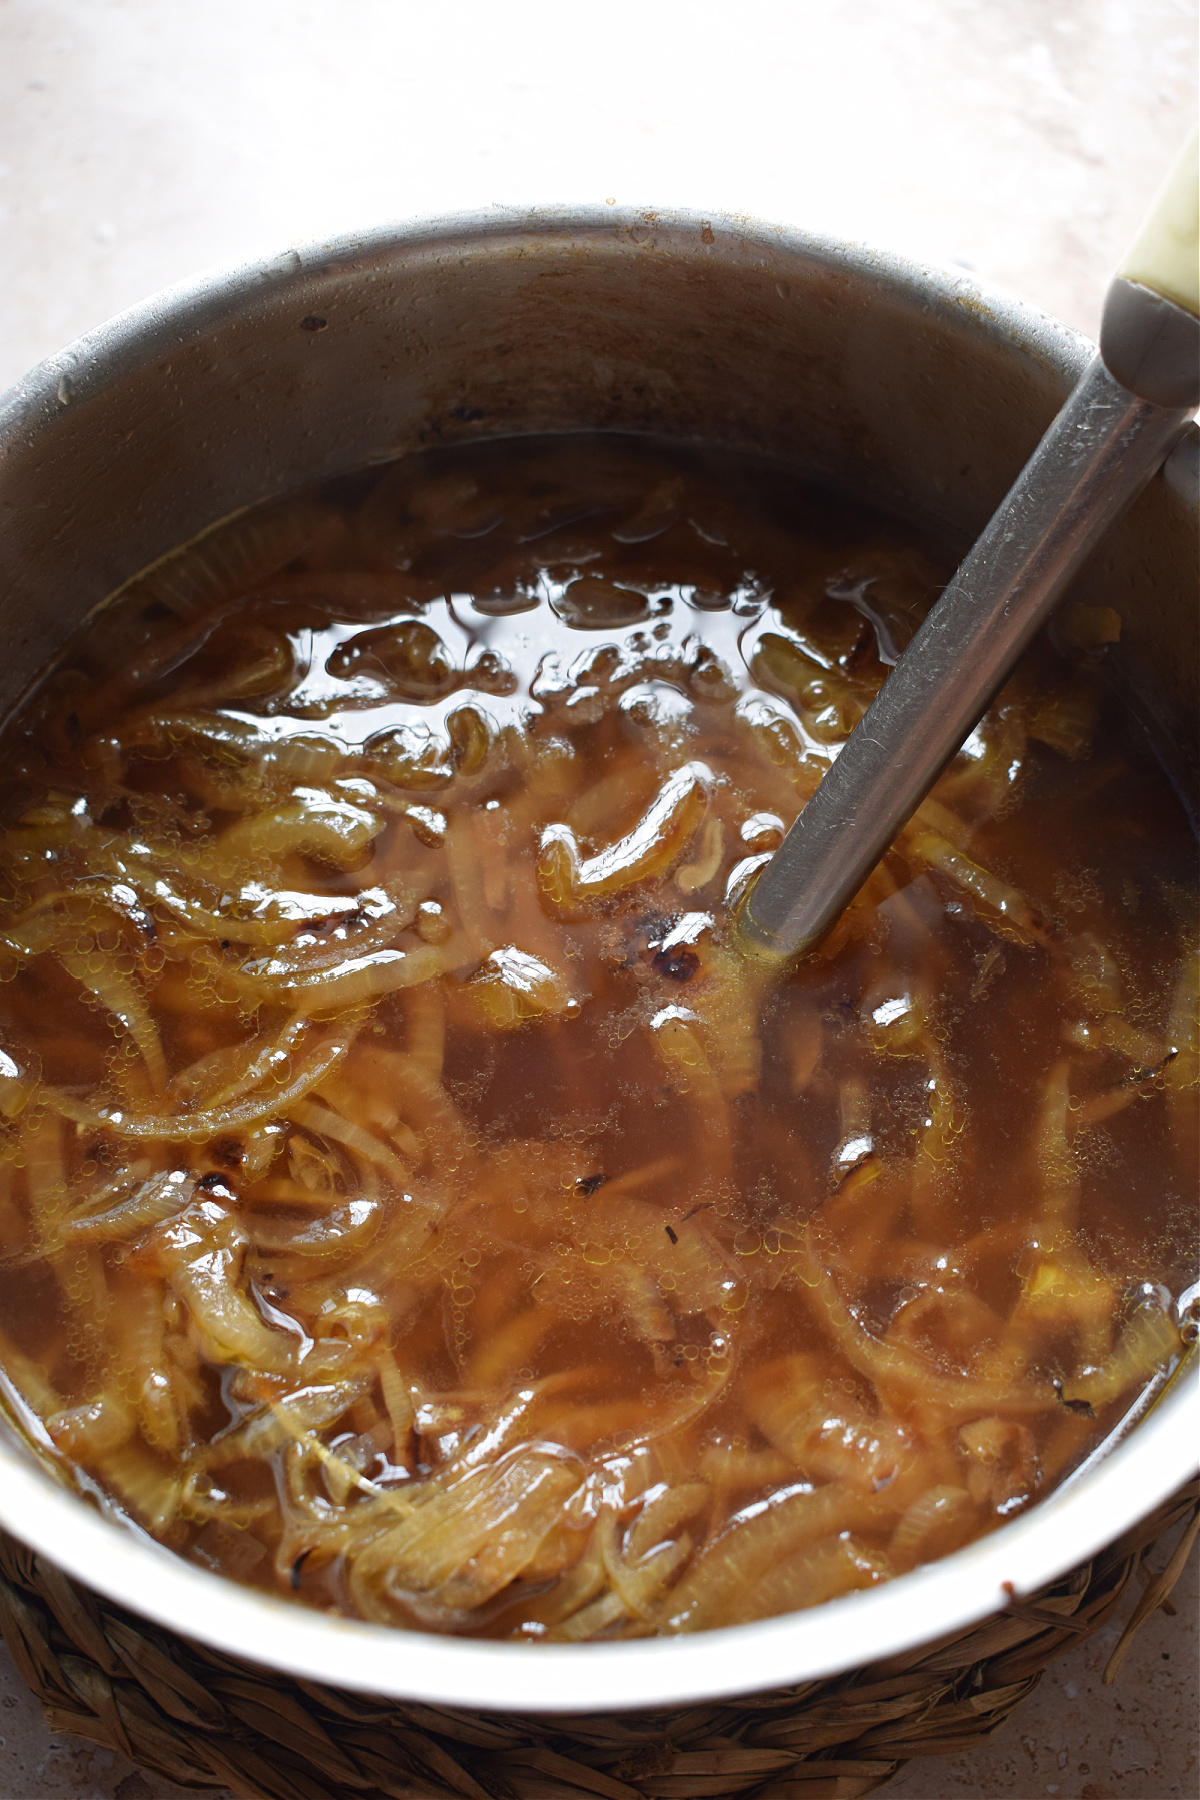 Caramelized onion in a saucepan.